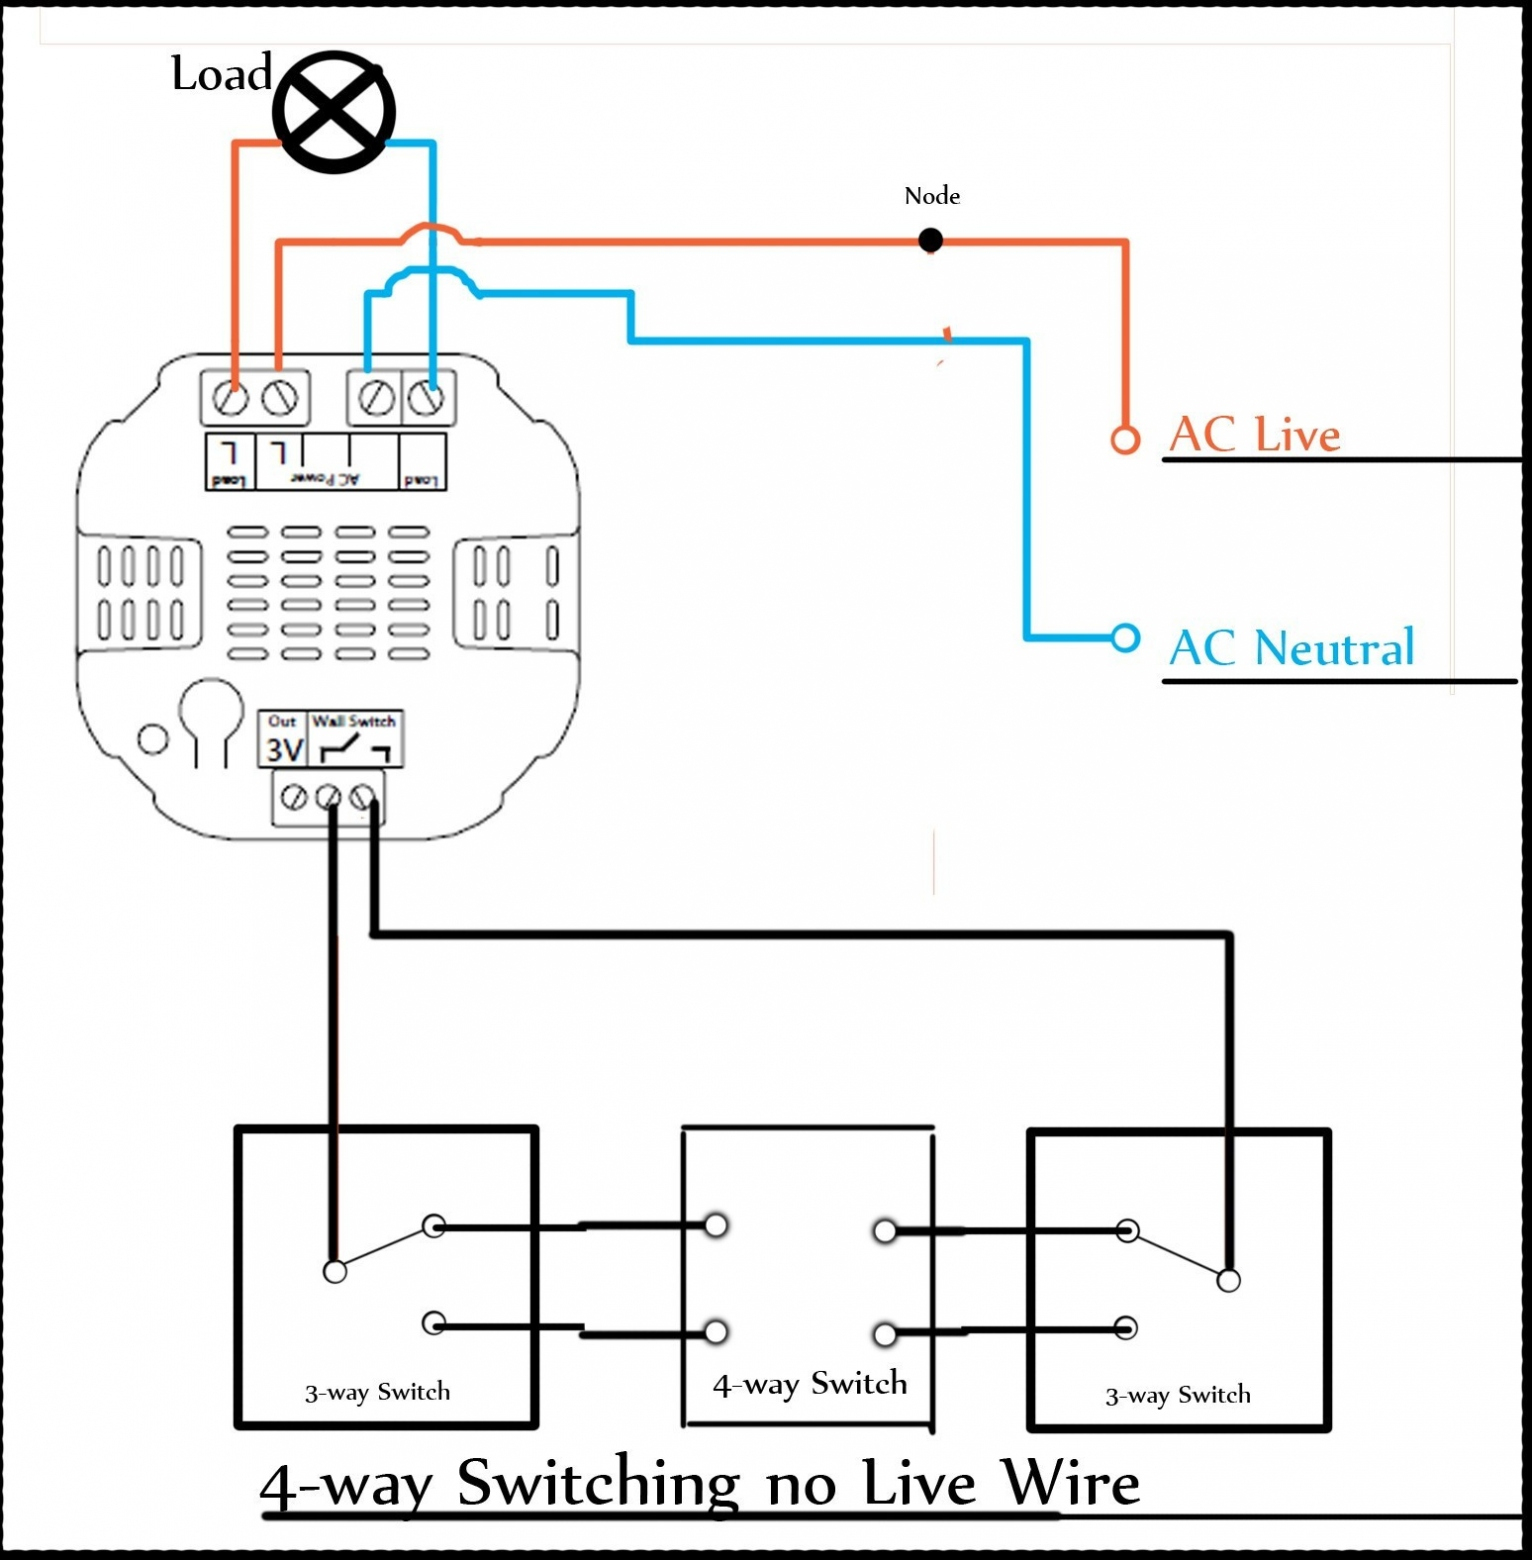 Wiring Diagram For 1 Way Dimmer Switch Save Dimm Switch Wiring - Dimming Switch Wiring Diagram